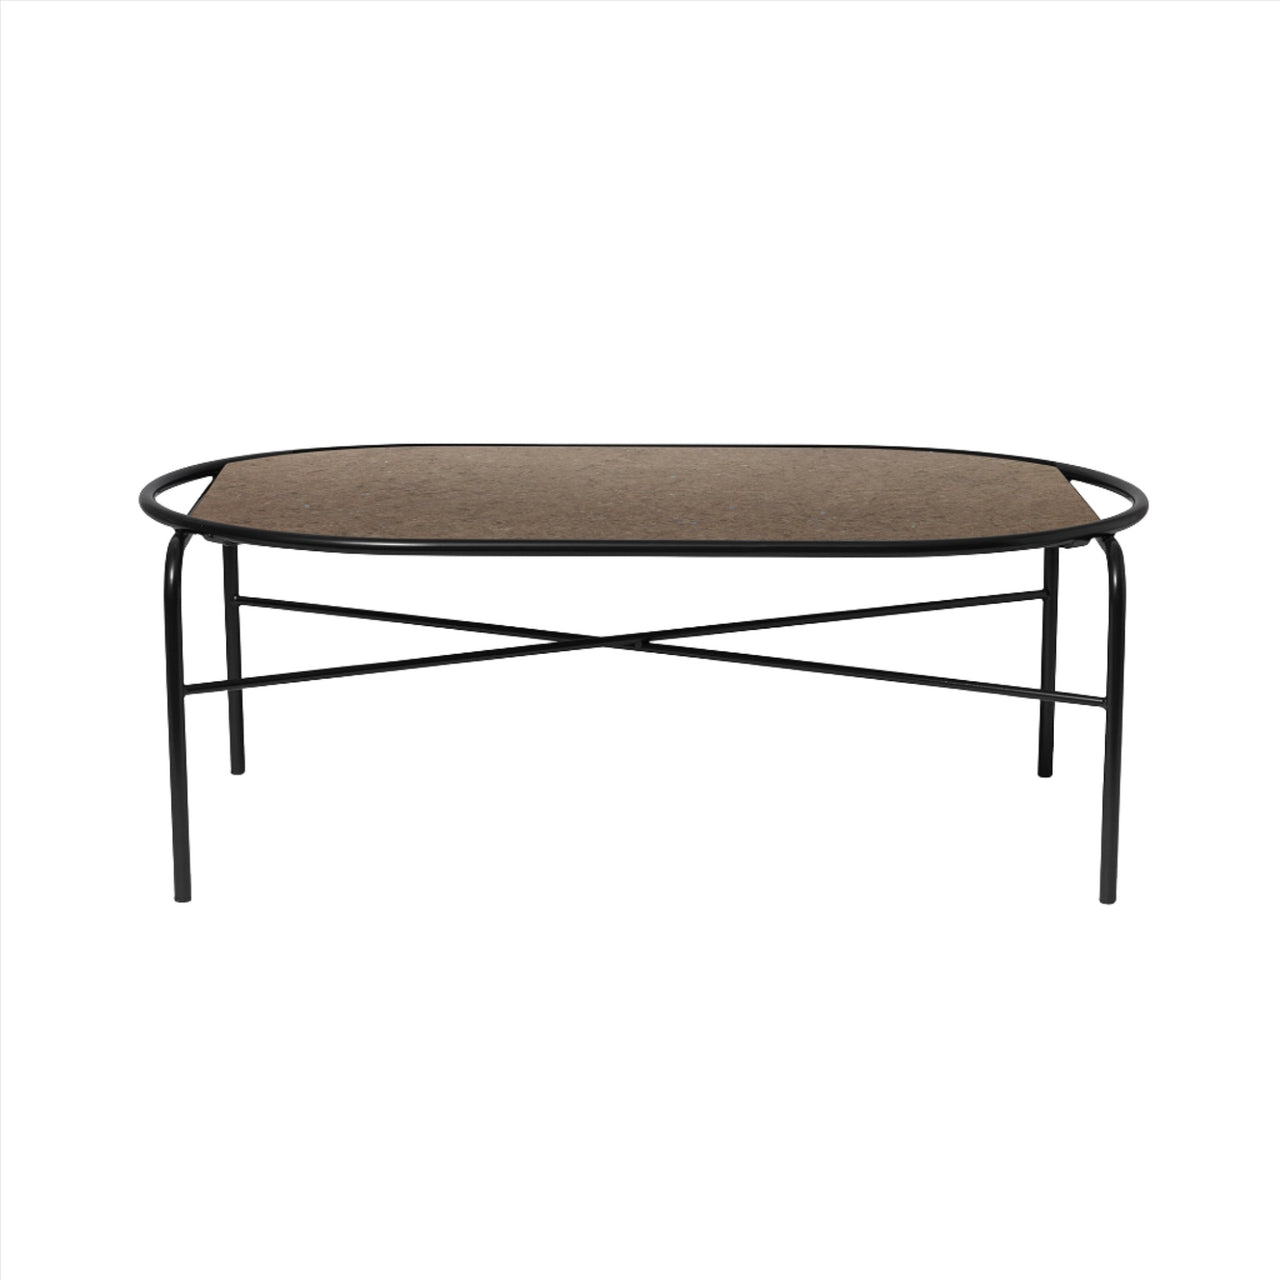 Secant Coffee Table: Oval + Soft Black + Antique Brown Granite